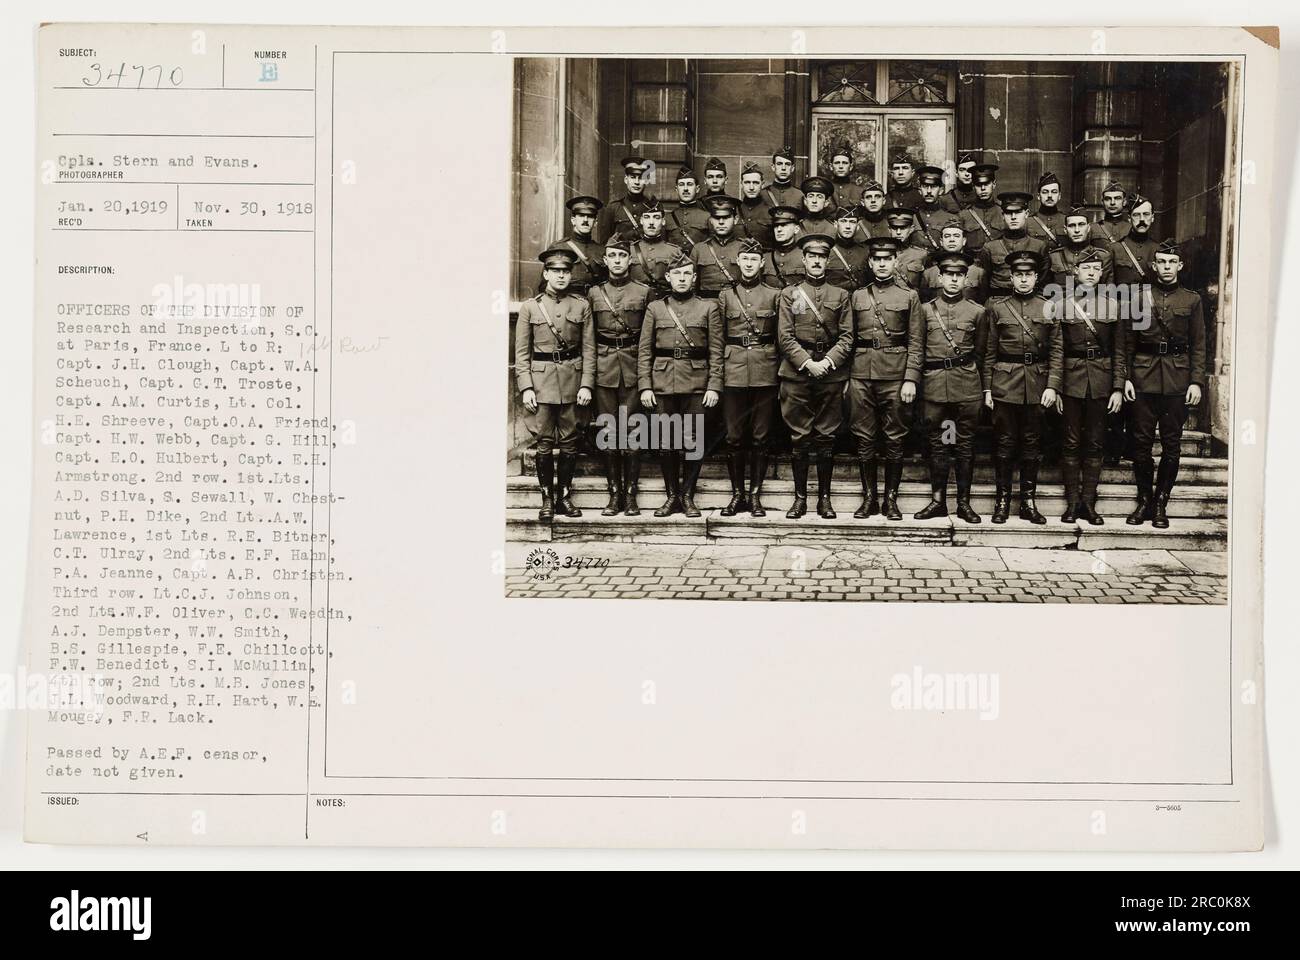 'Photograph depicting officers of the Division of Research and Inspection, S.C. at Paris, France during World War One. The officers are arranged in multiple rows, with their names listed. The photograph was taken on November 30, 1918. Passed by A.E.F. censor, date not given.' Stock Photo